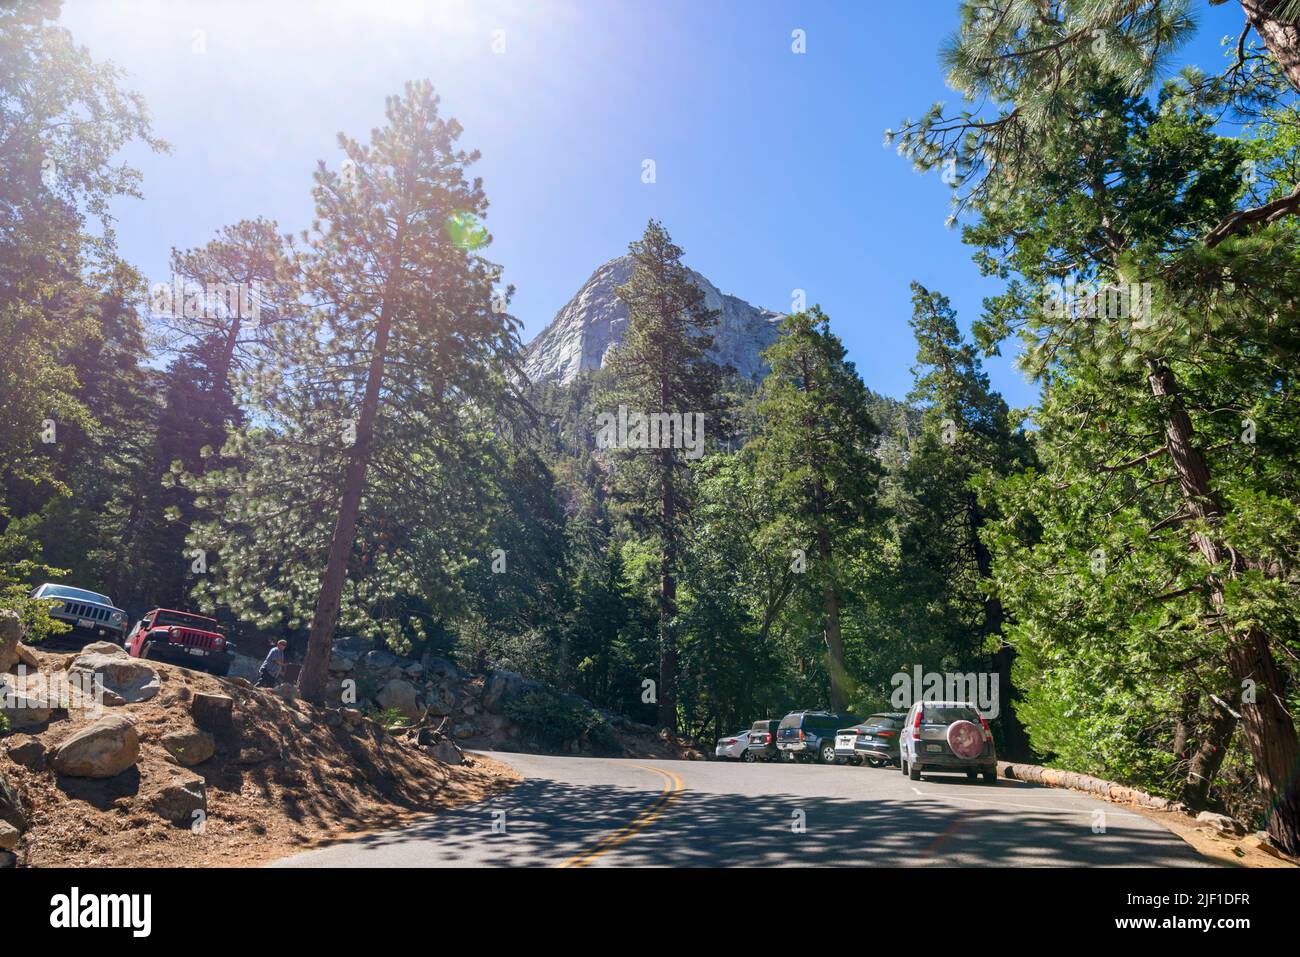 Tahquitz Rock or Lily Rock viewed from Humber Park.  Idyllwild, California, USA. Stock Photo